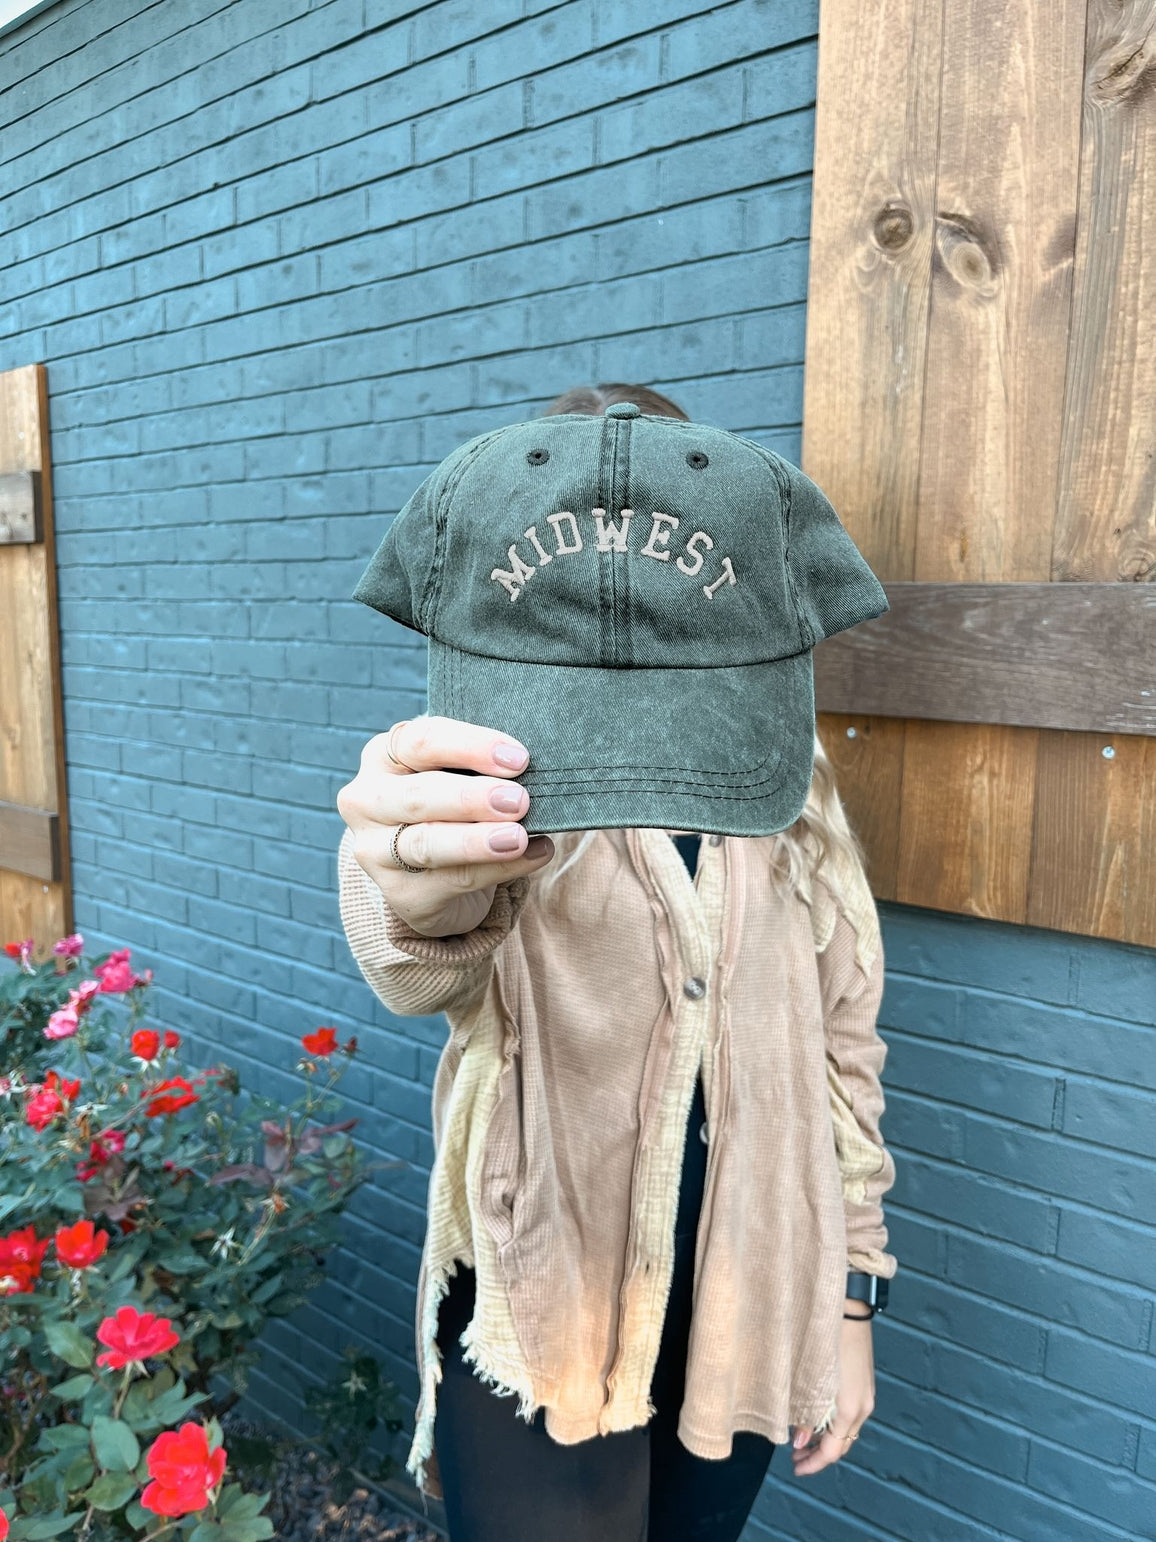 Midwest Hat - Green